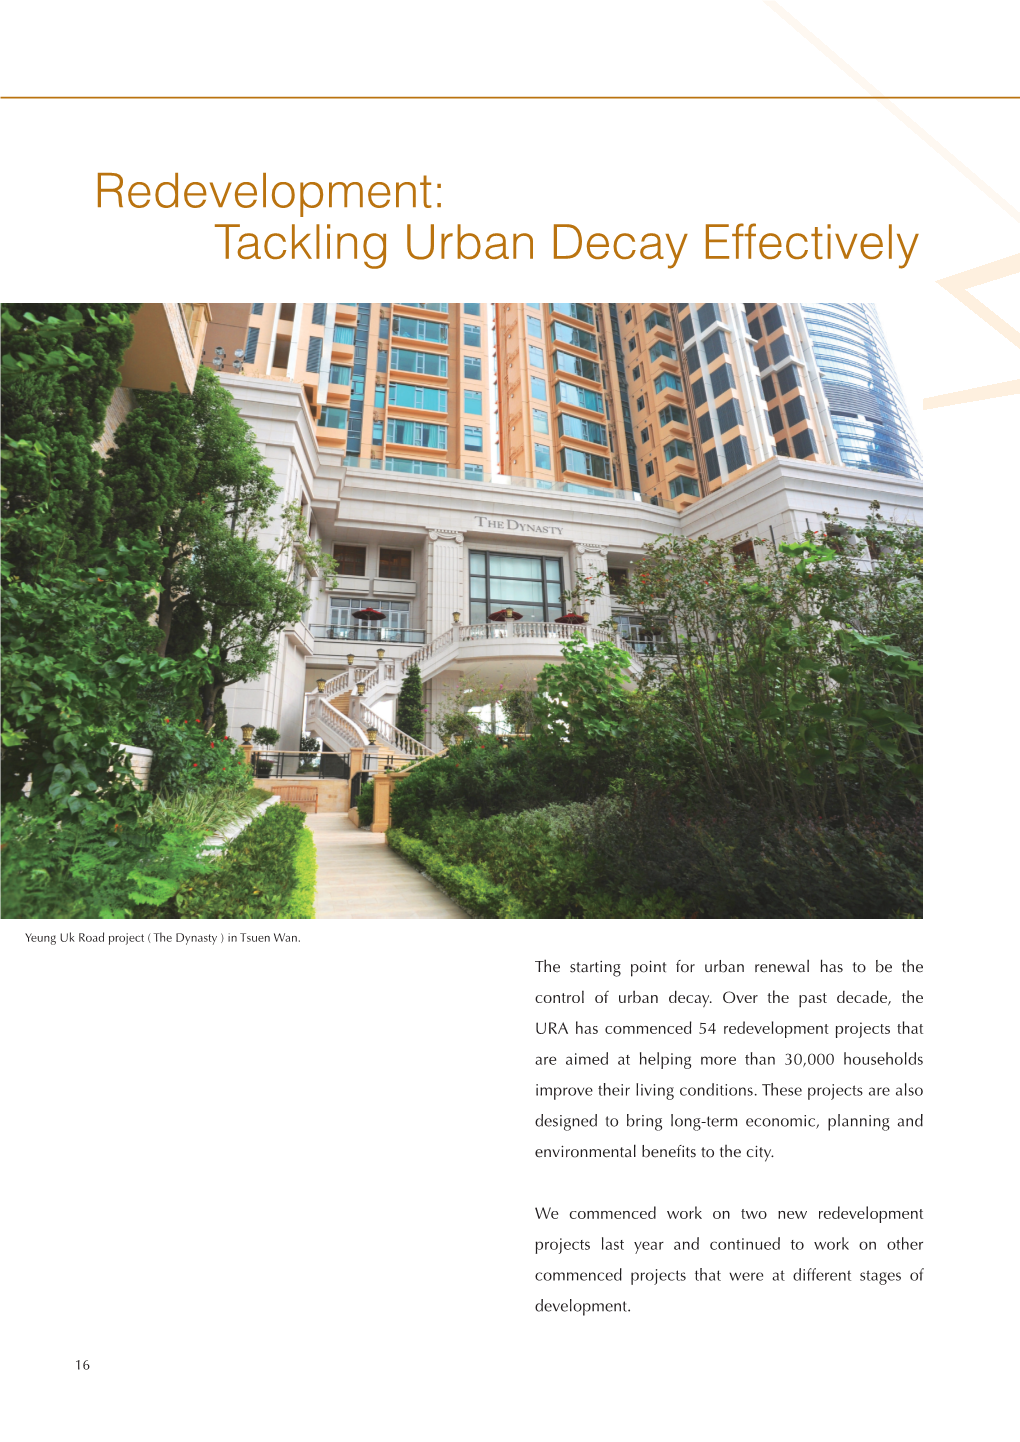 Redevelopment: Tackling Urban Decay Effectively